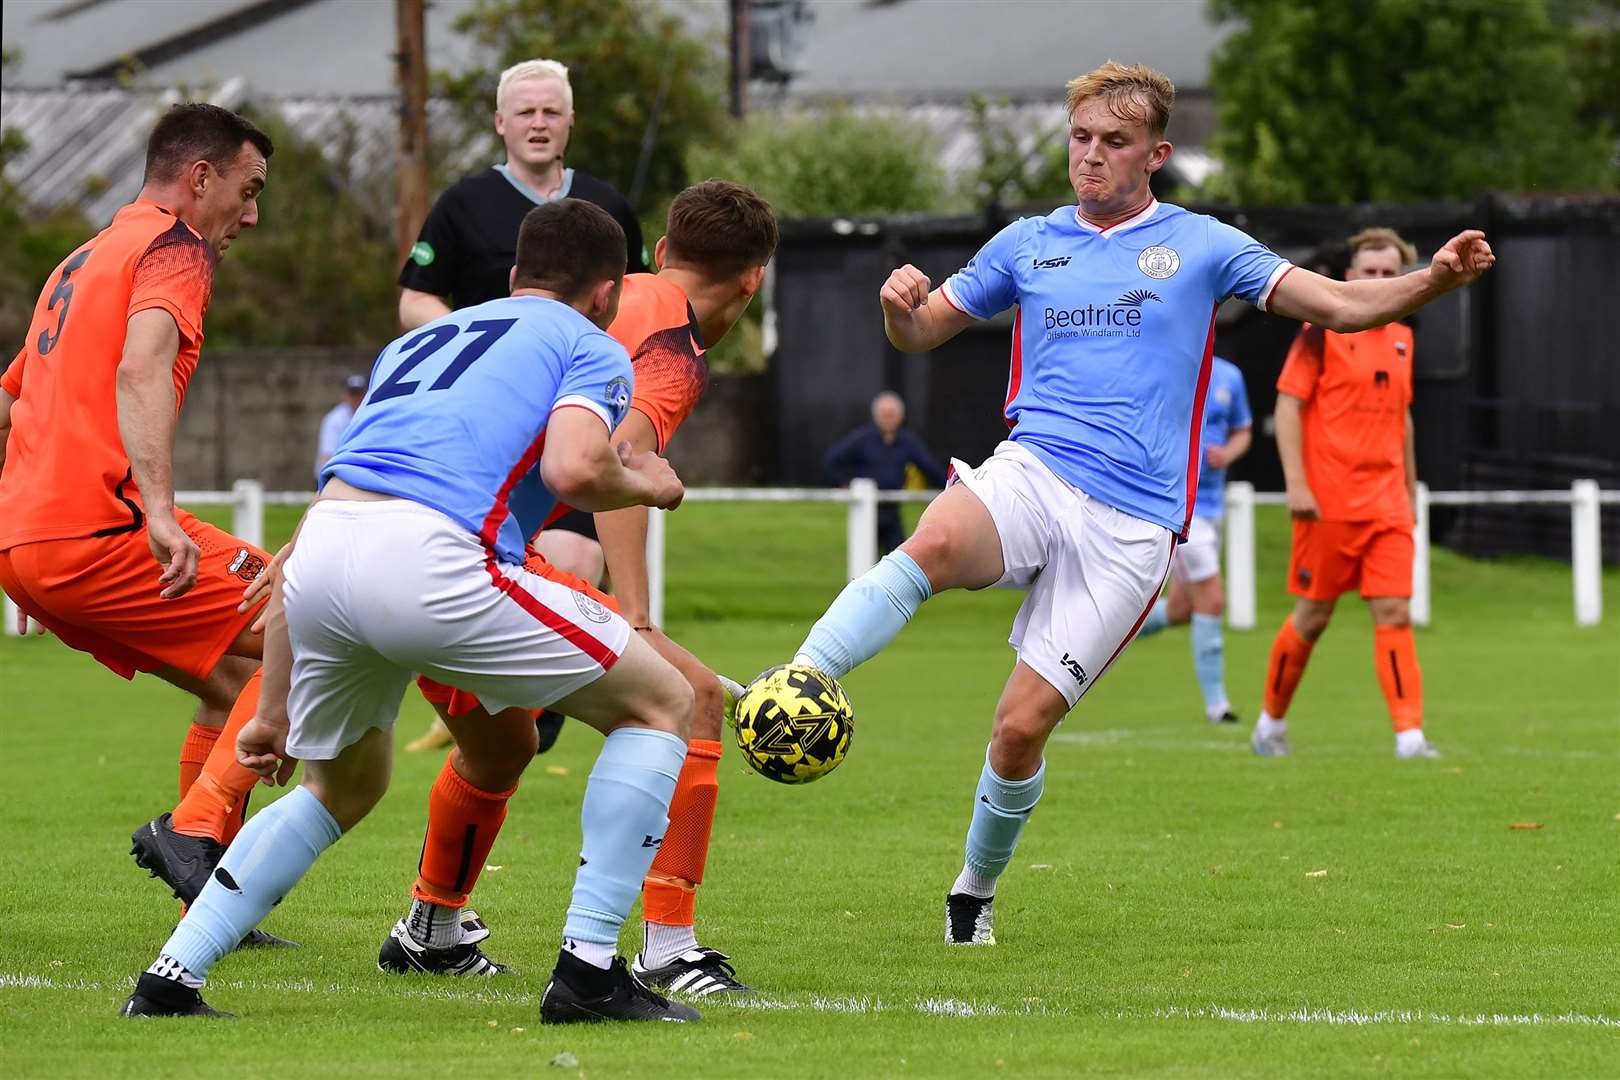 Wick's Mark Macadie beats Callum Haspell to the ball during the match against Rothes in August in which Macadie suffered an arm injury. Picture: Mel Roger